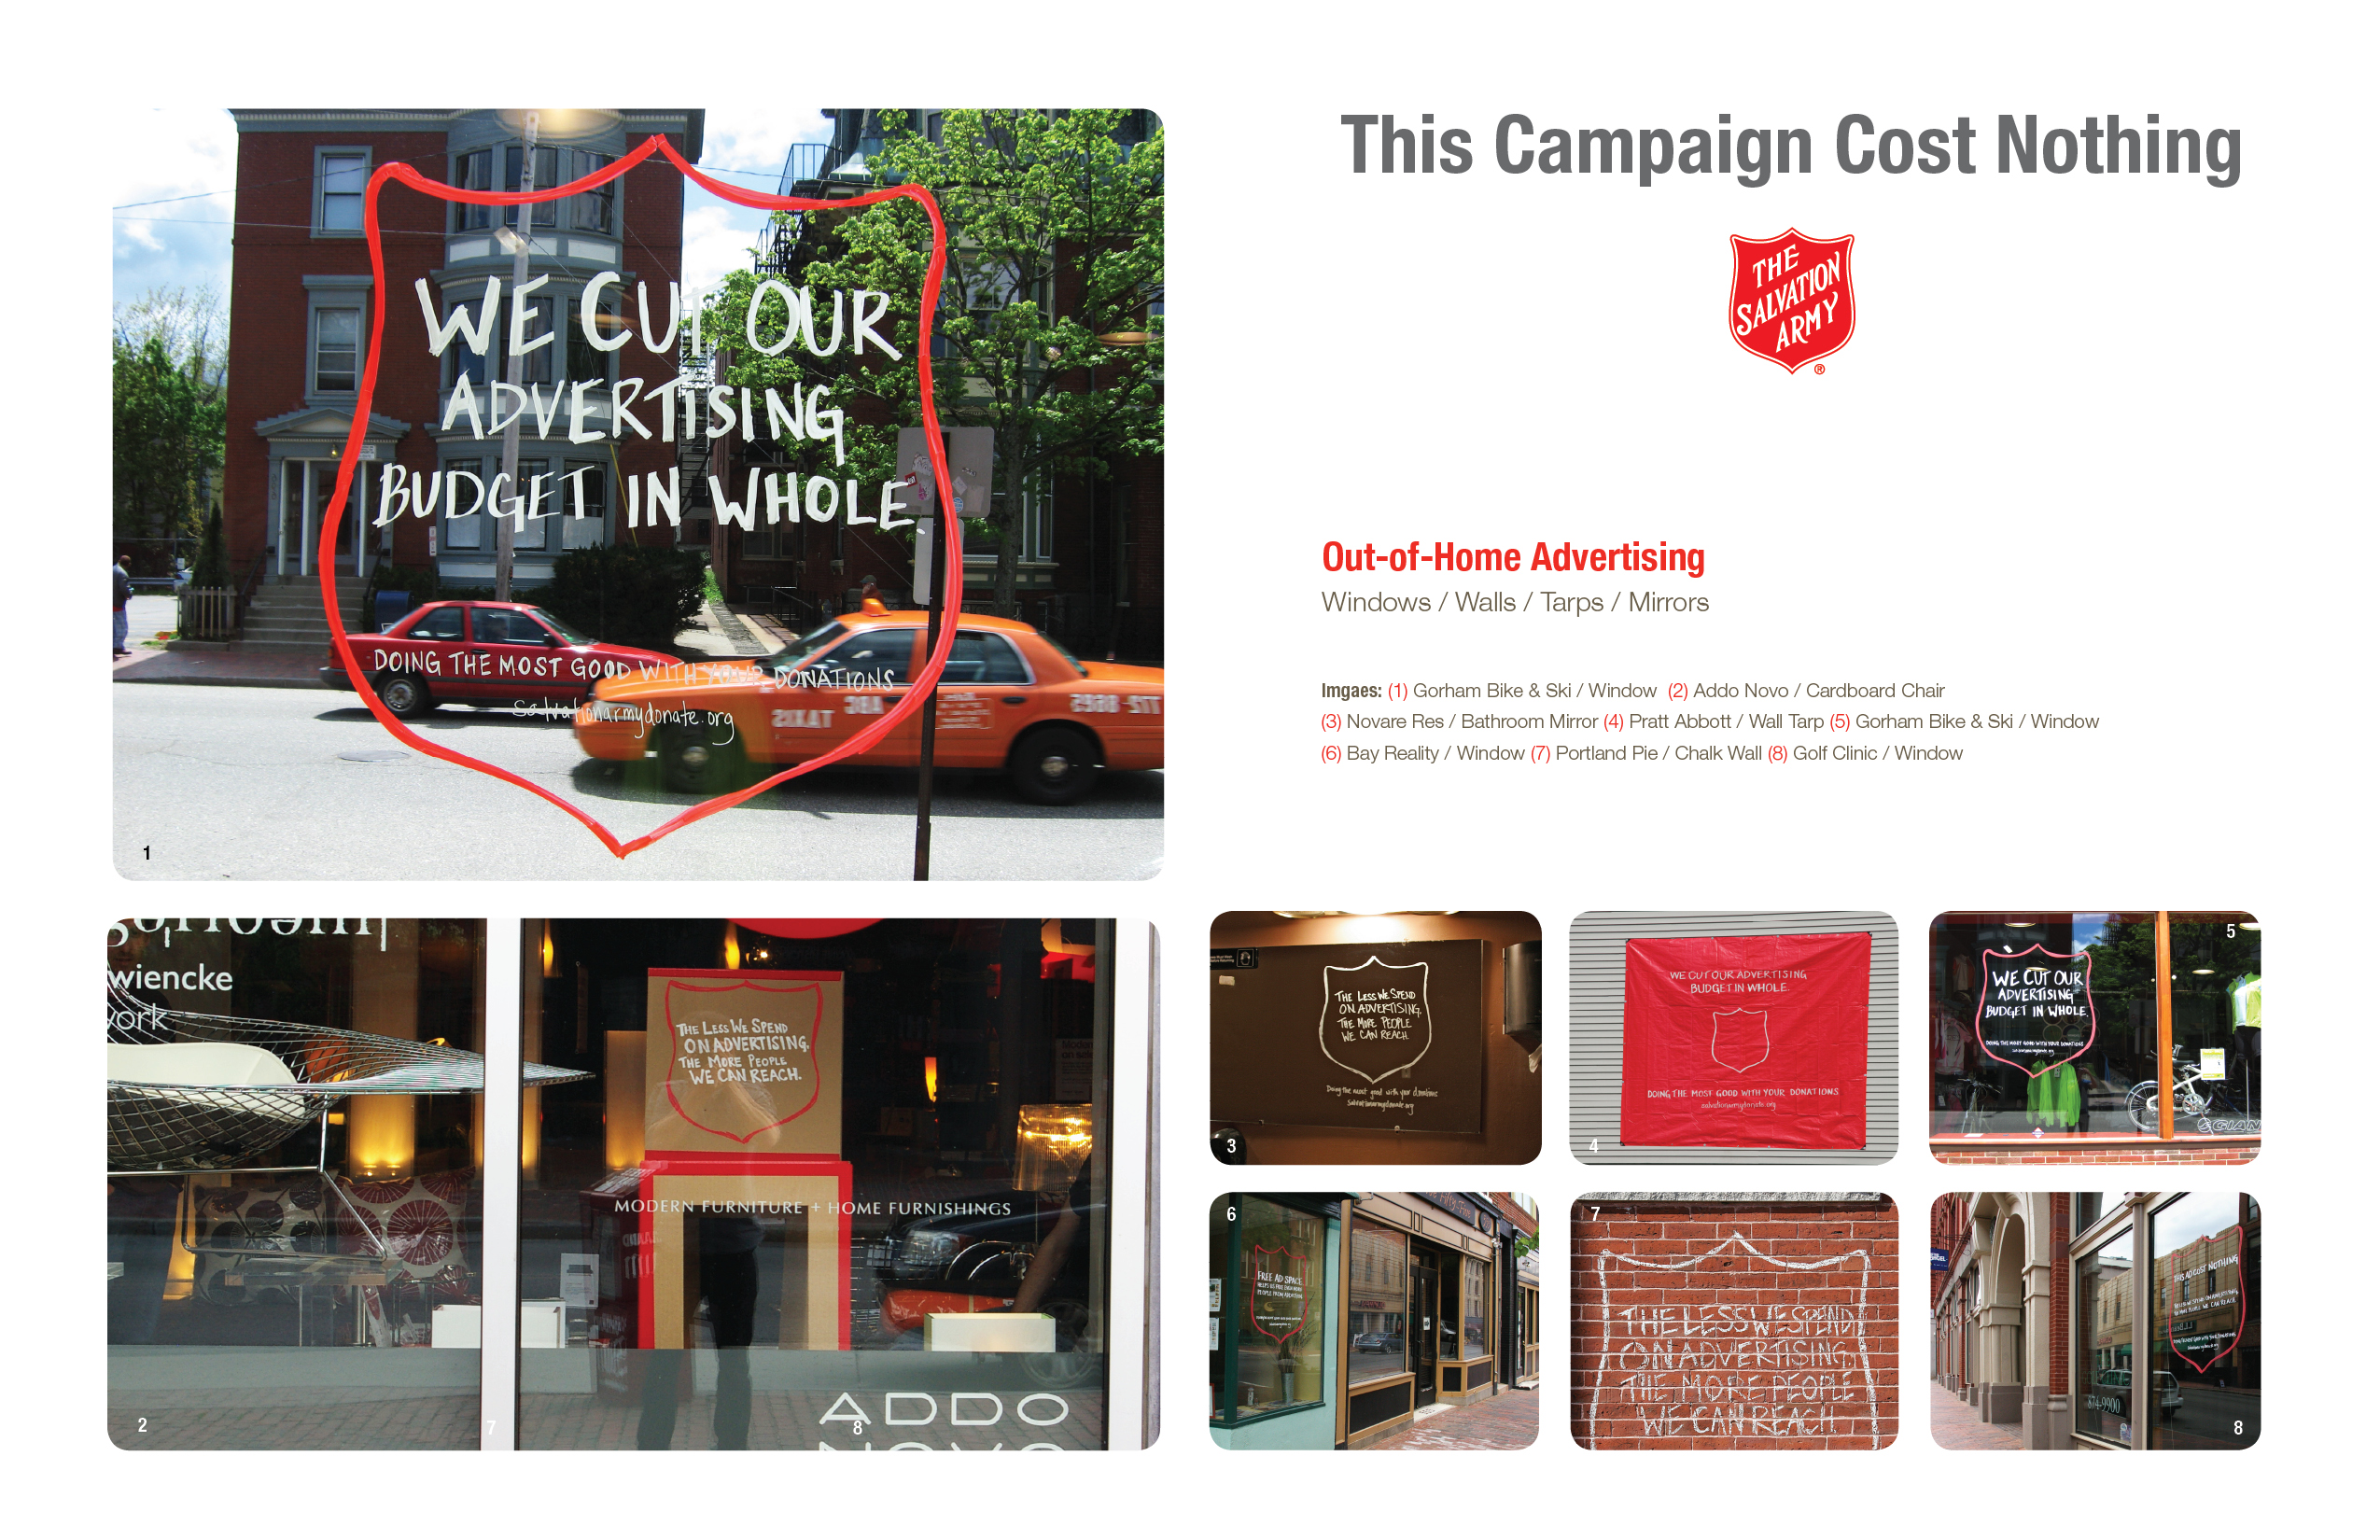 This Campaign Cost Nothing created by The VIA Group for The Salvation Army